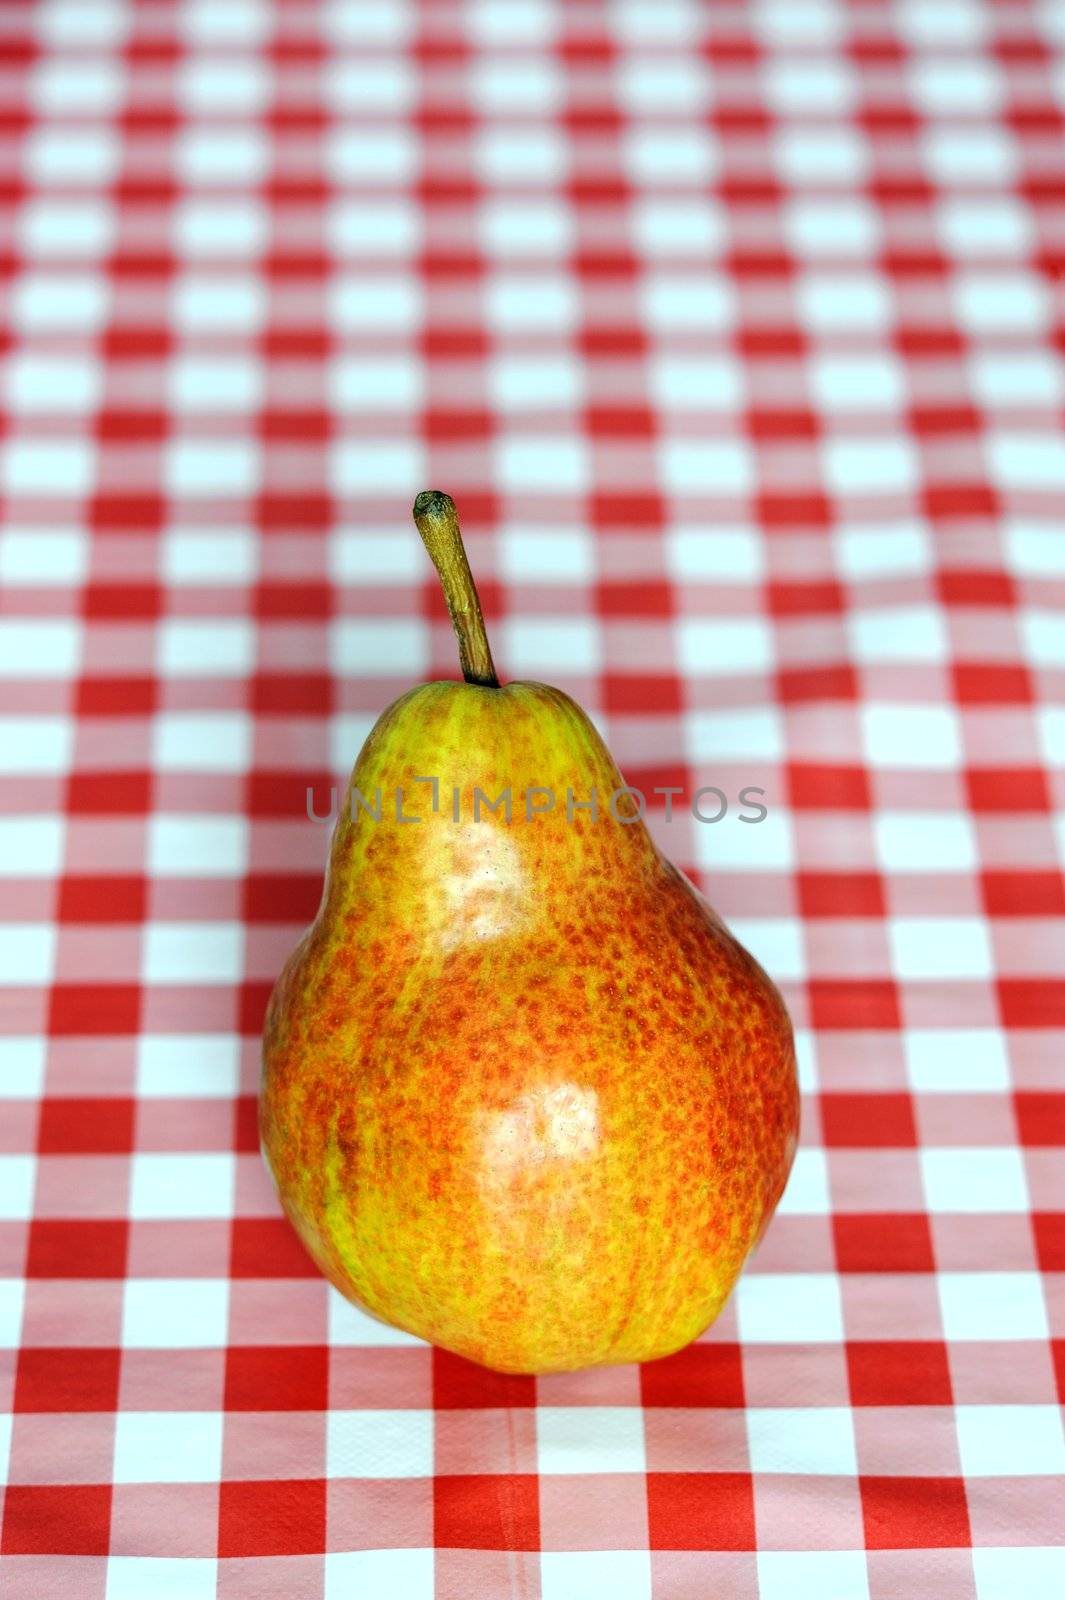 An image of a ripe pear on the table